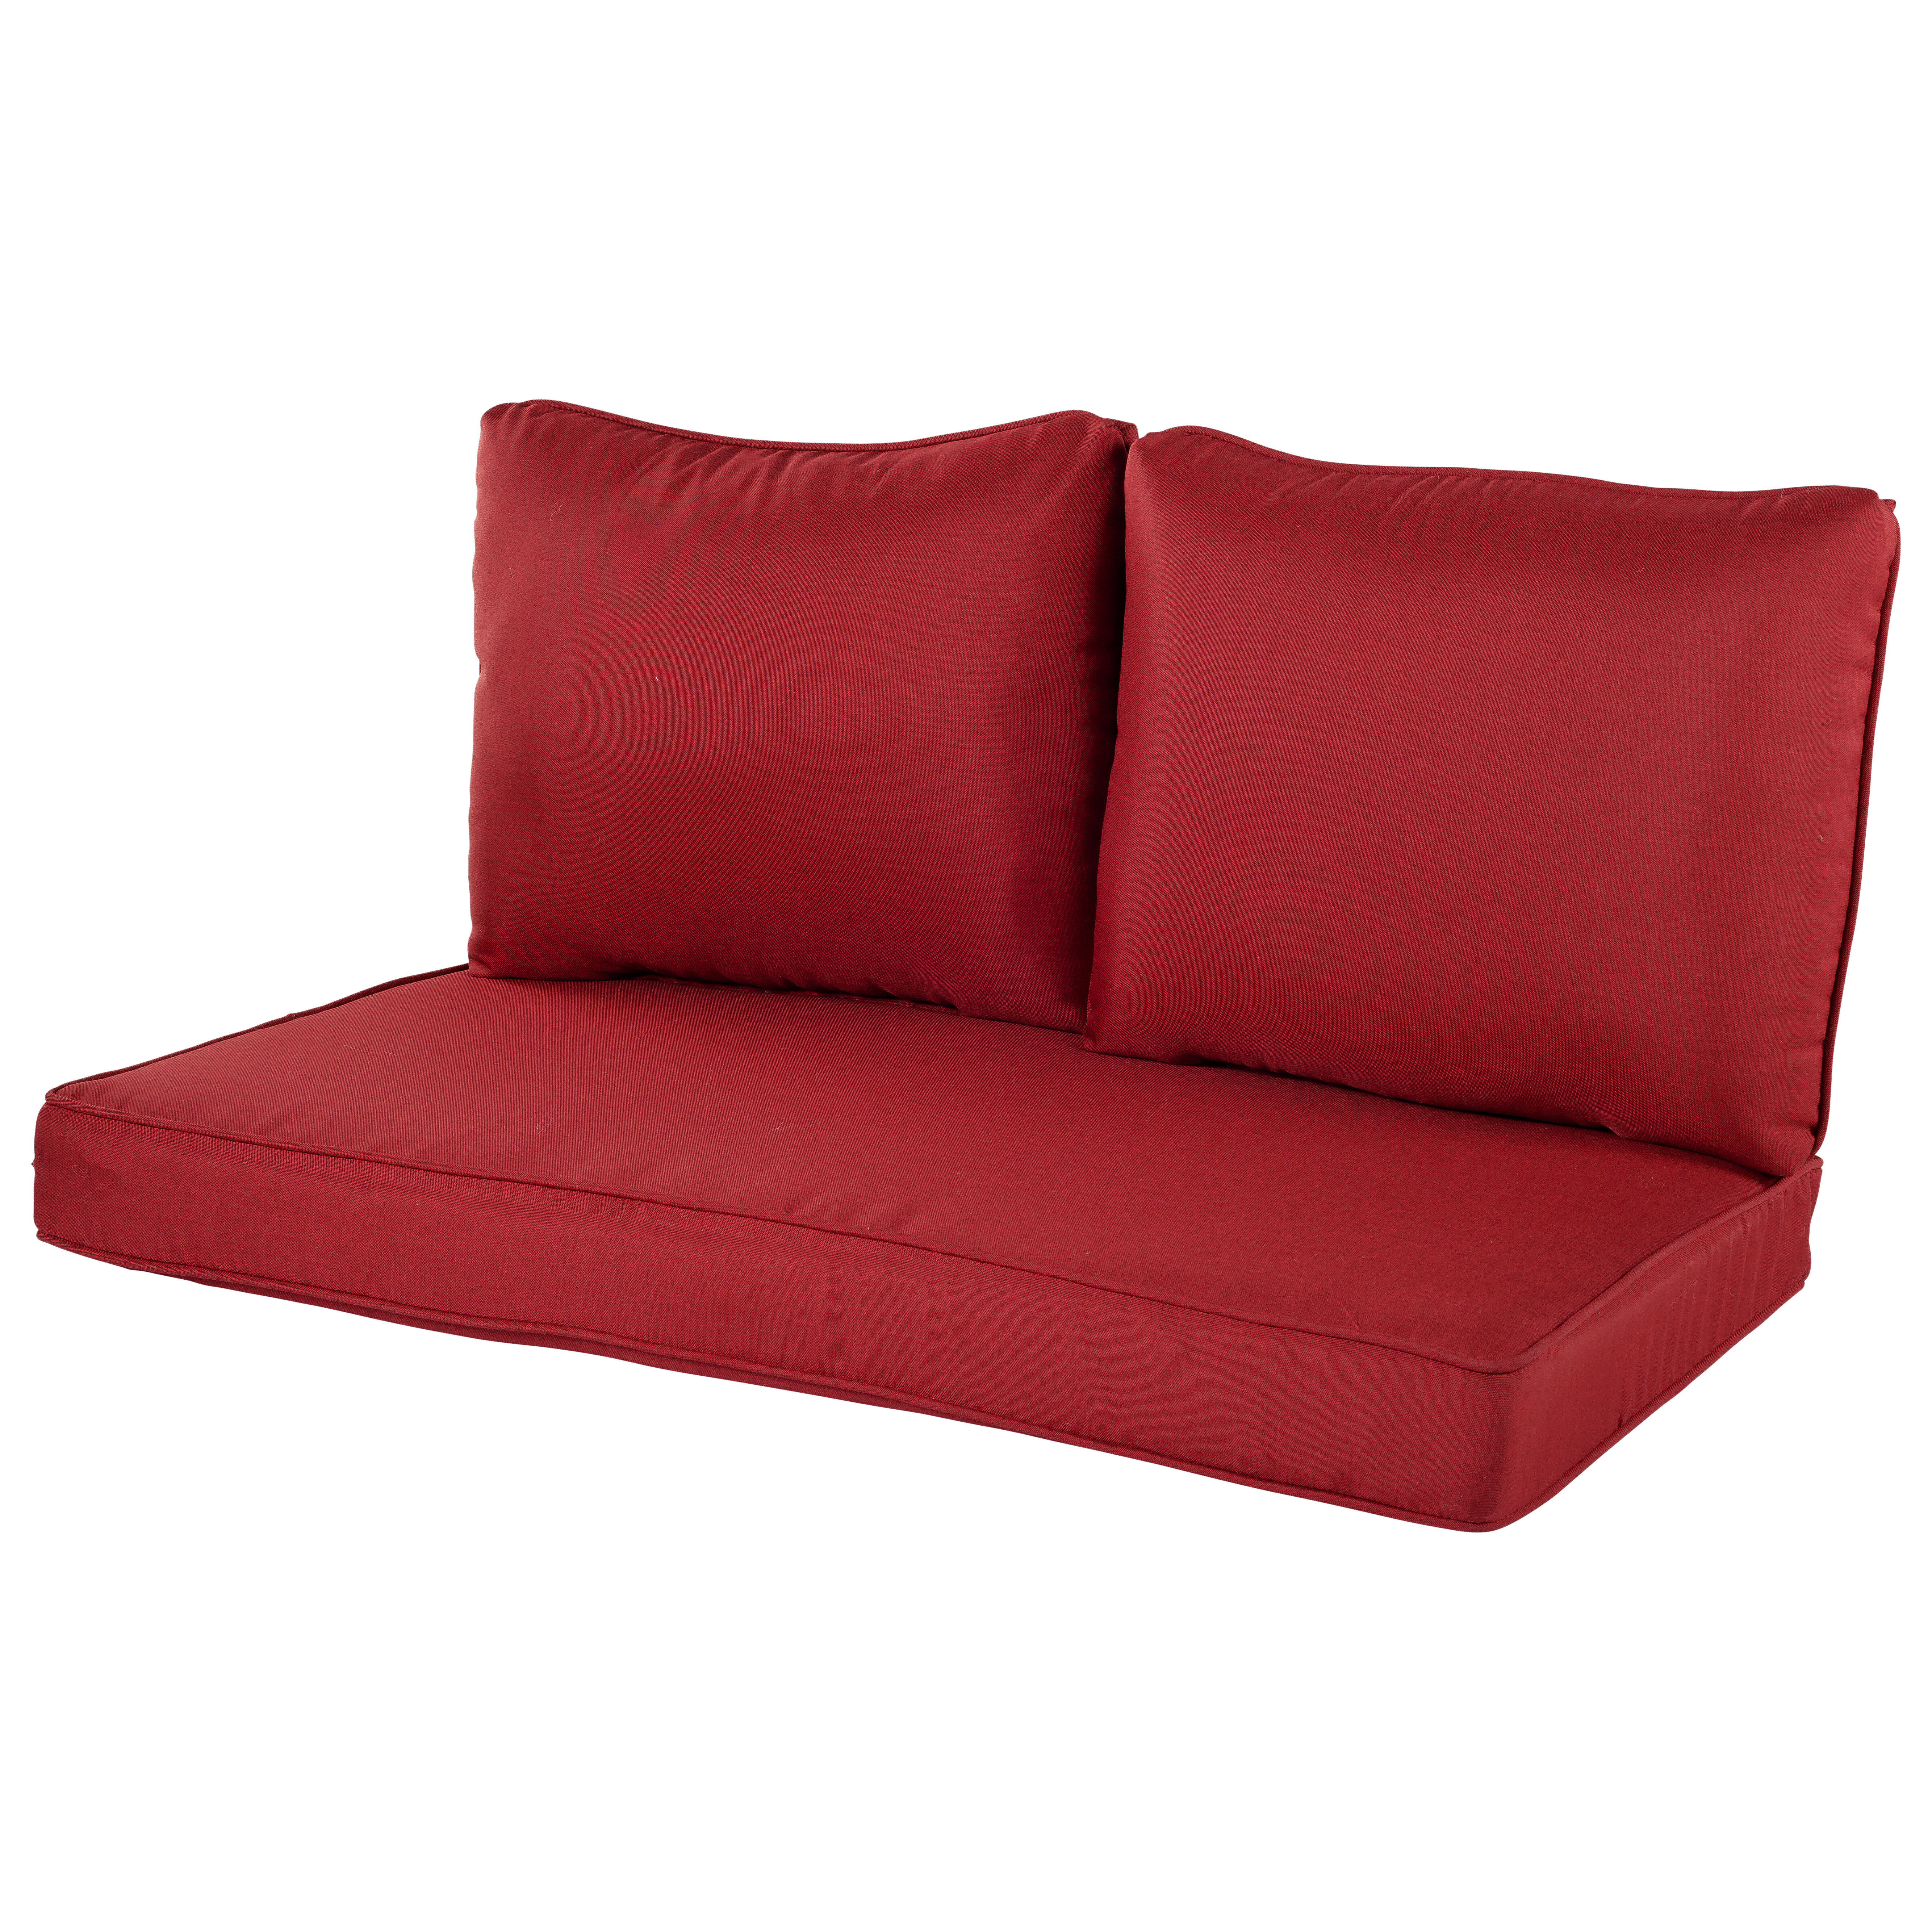 outdoor loveseat cushions lowes